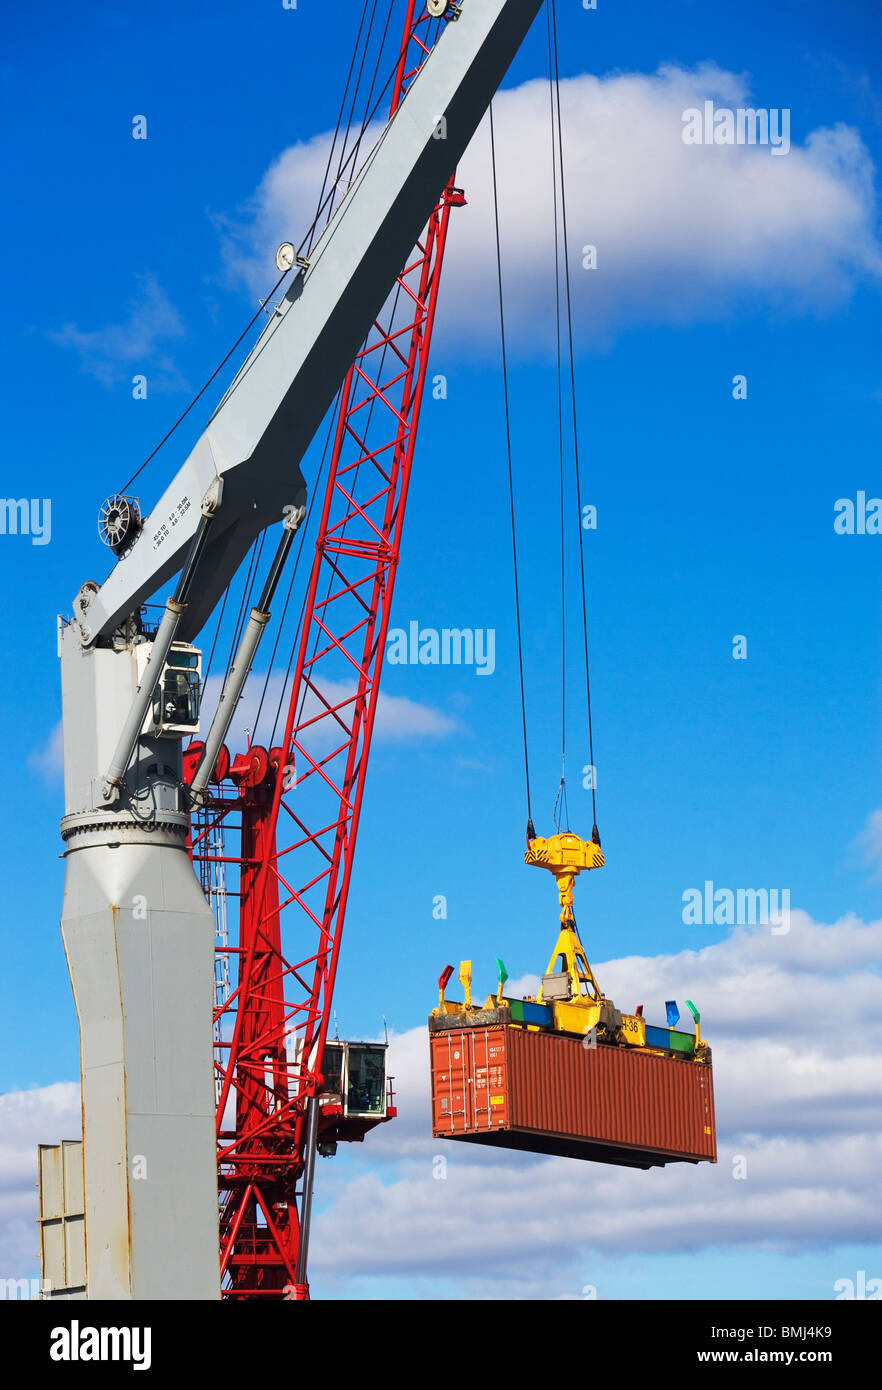 Crane lifting shipping container Stock Photo